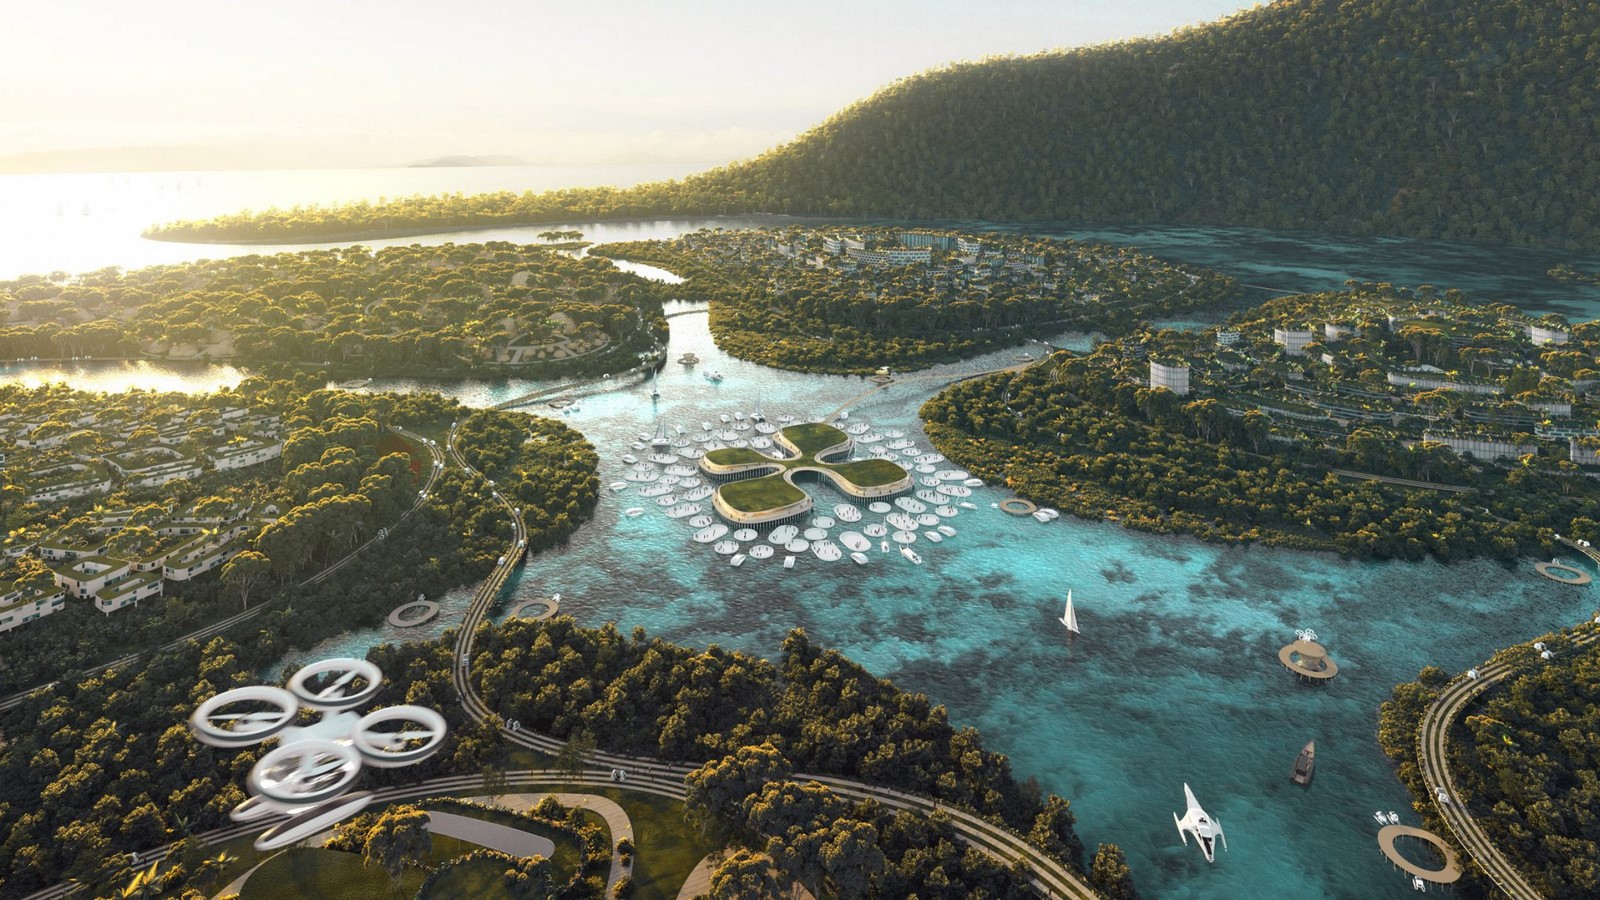 Plan to redesign Earth and stop climate change- Masterplanet concept revealed by Bjarke Ingels - Sheet3